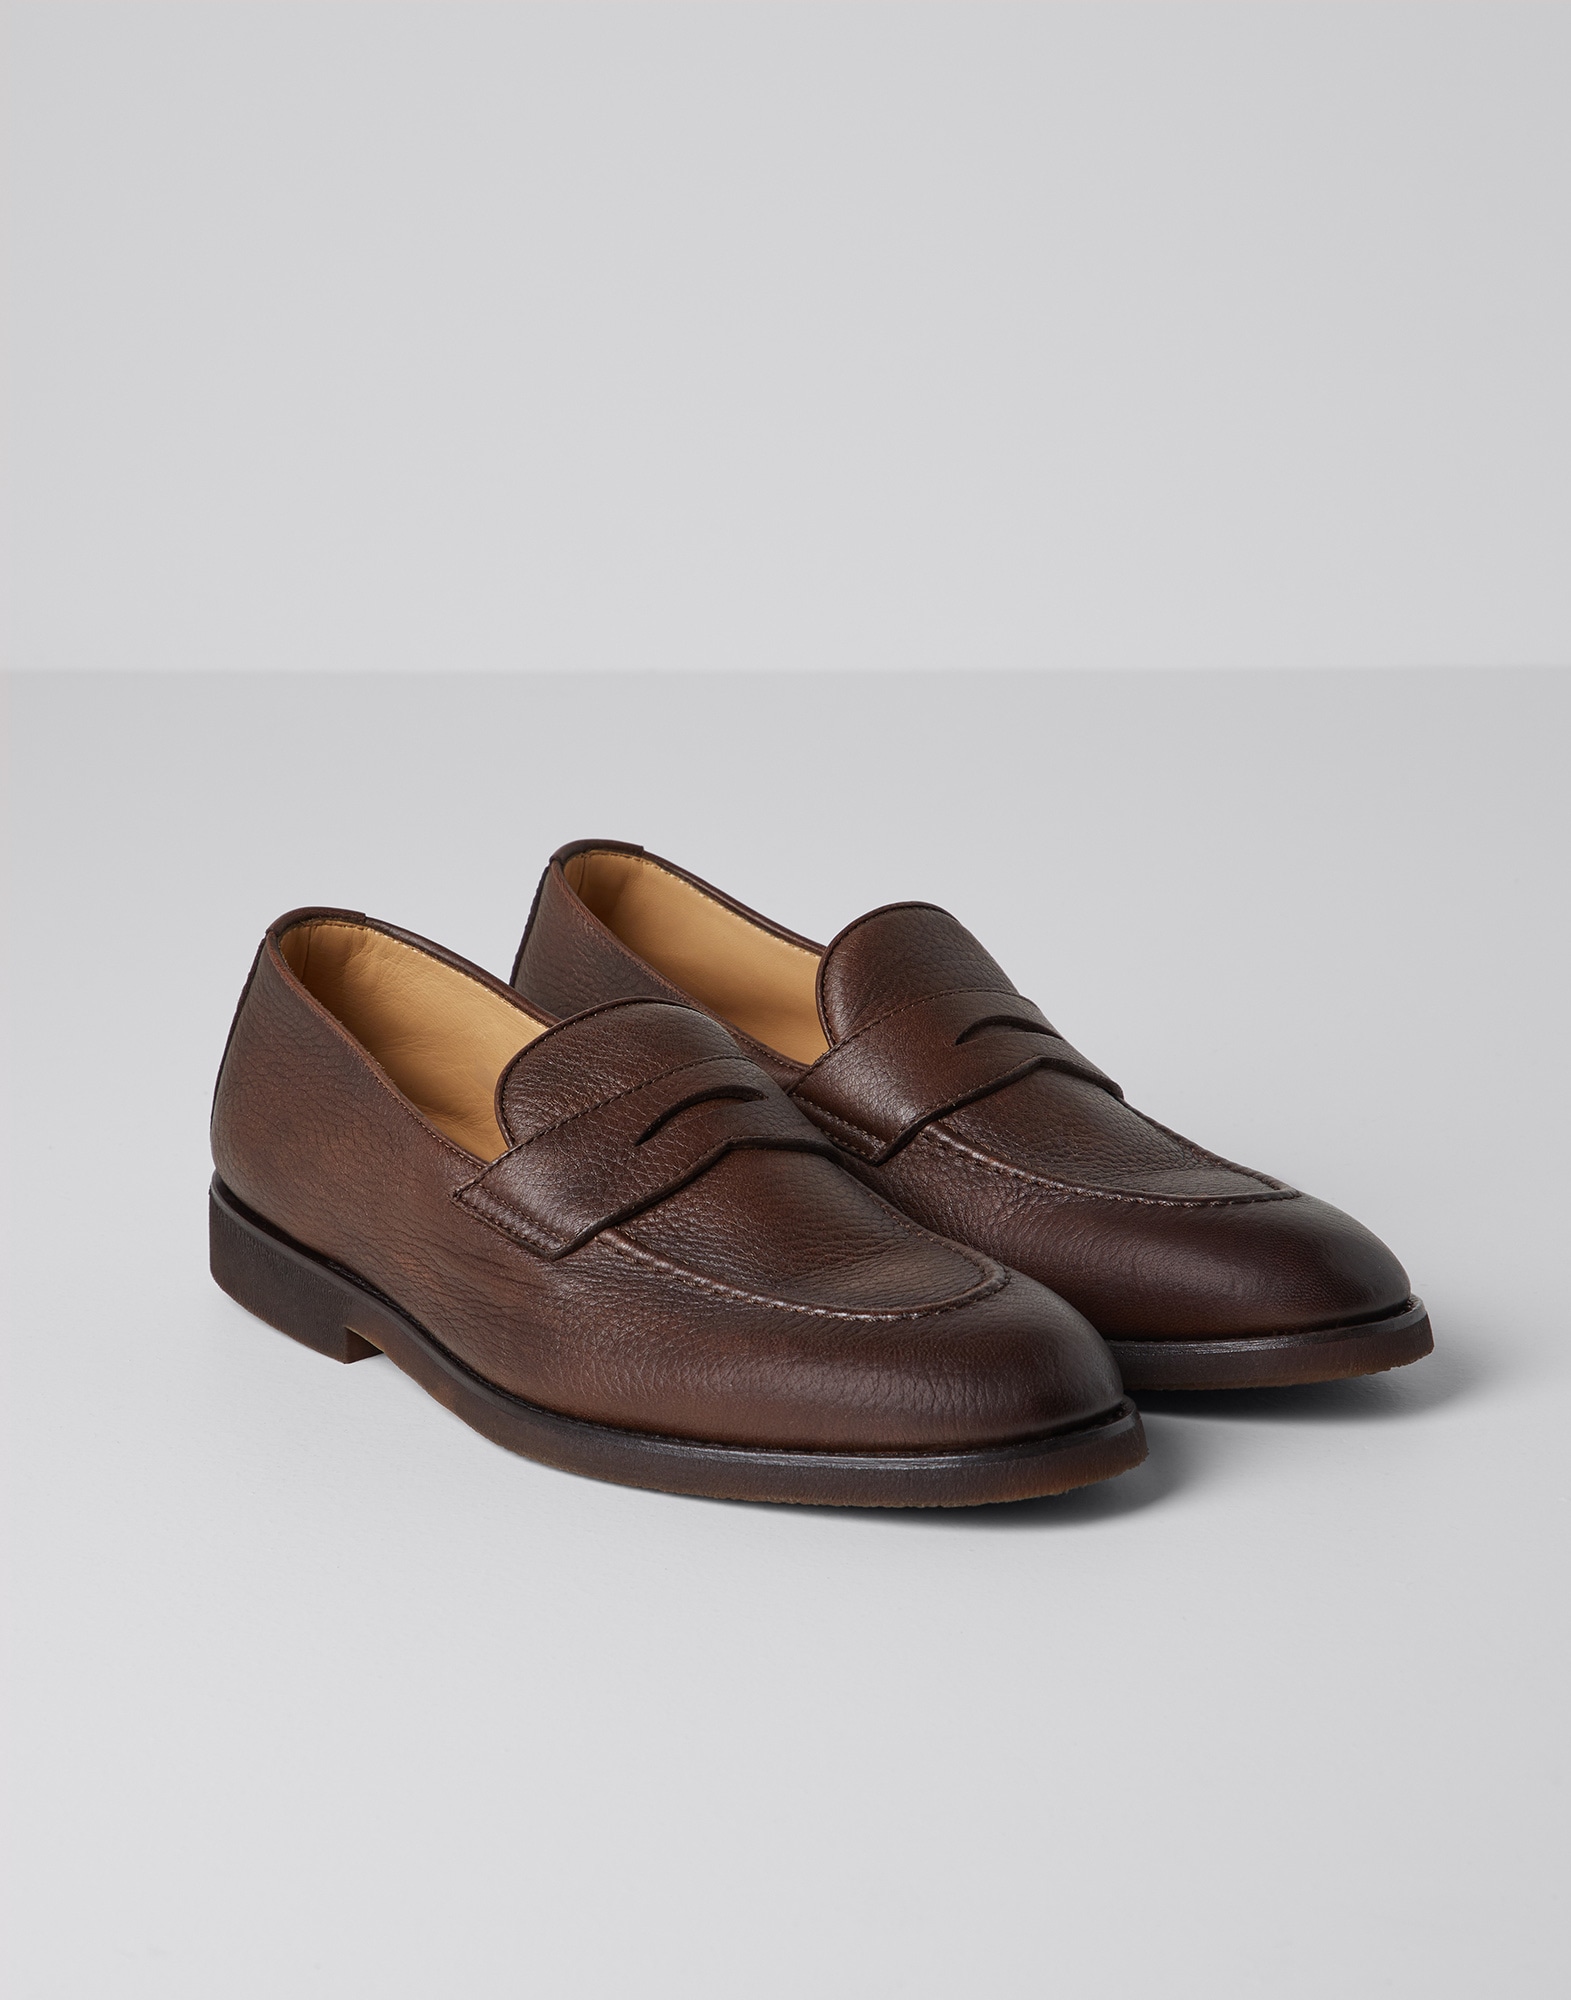 Penny loafers with natural rubber sole